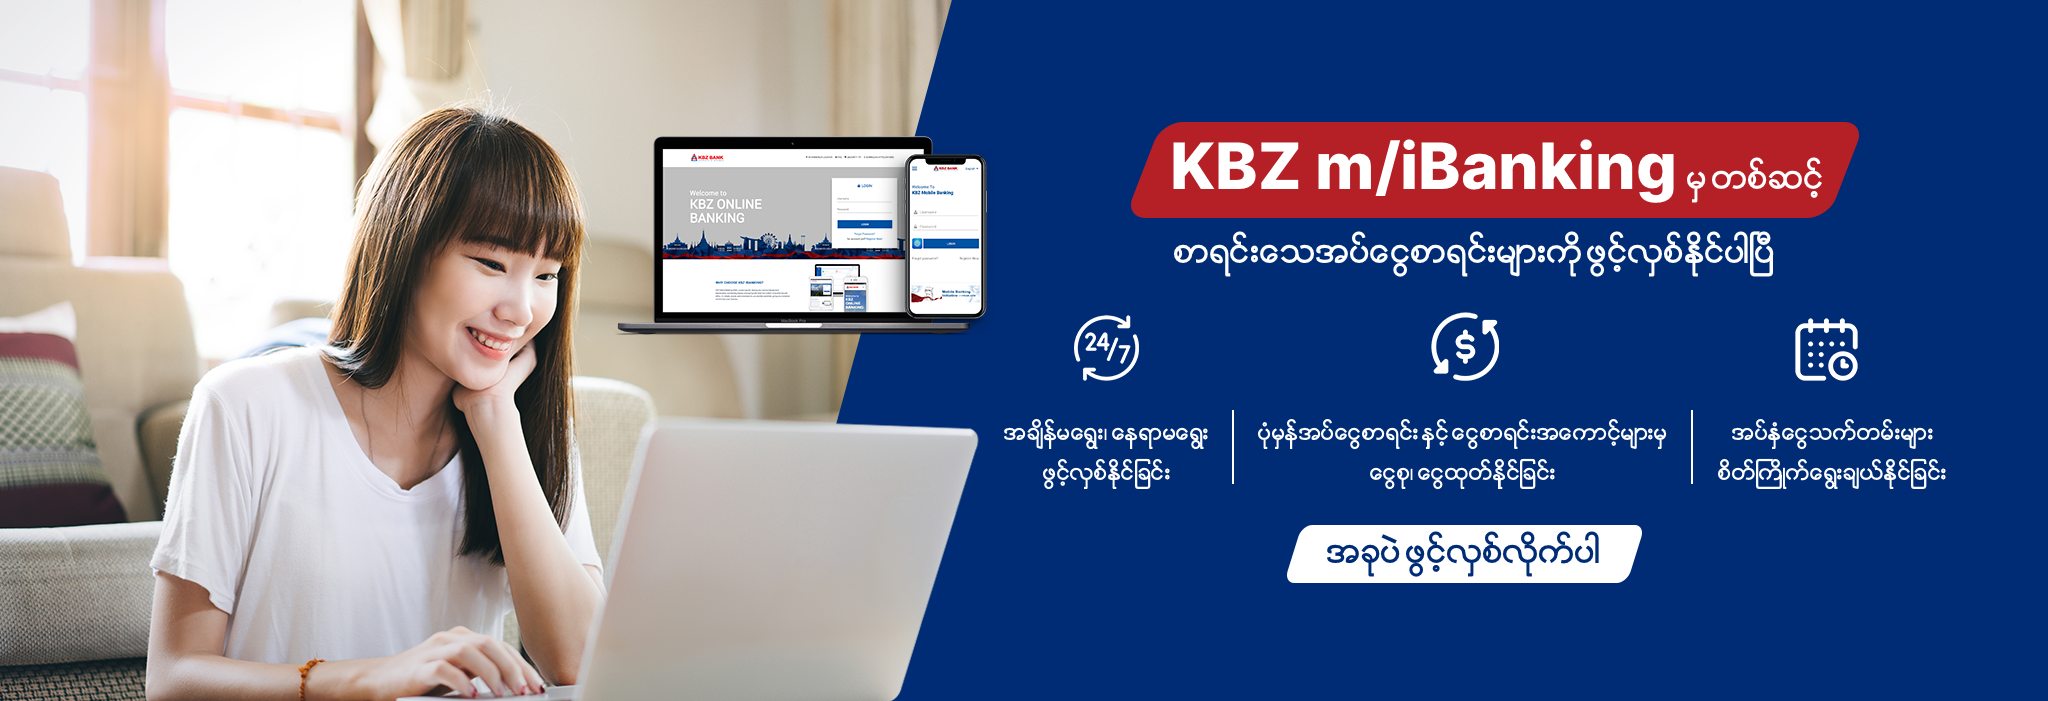 Open Fixed Deposit Account via KBZ m/iBanking